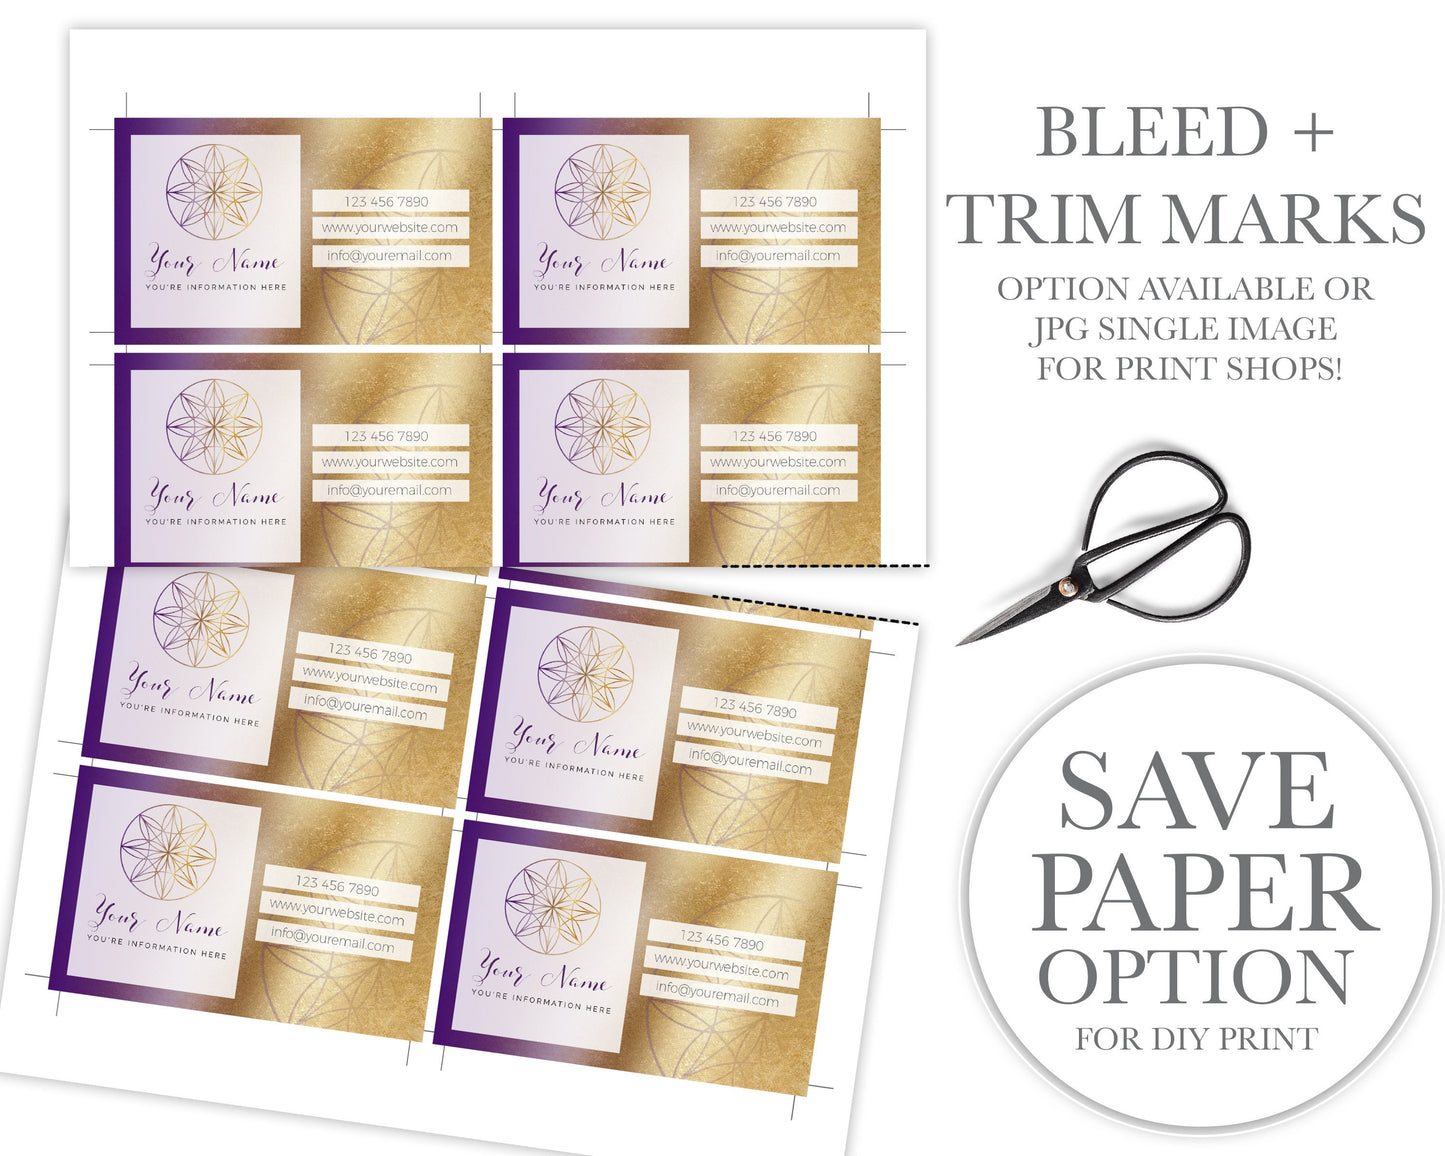 8pc Maxi Branding Kit Instant Download Purple and Gold Seeds of Life Coaching Design  | DIY Editable Template | Premade Business logo KM-001